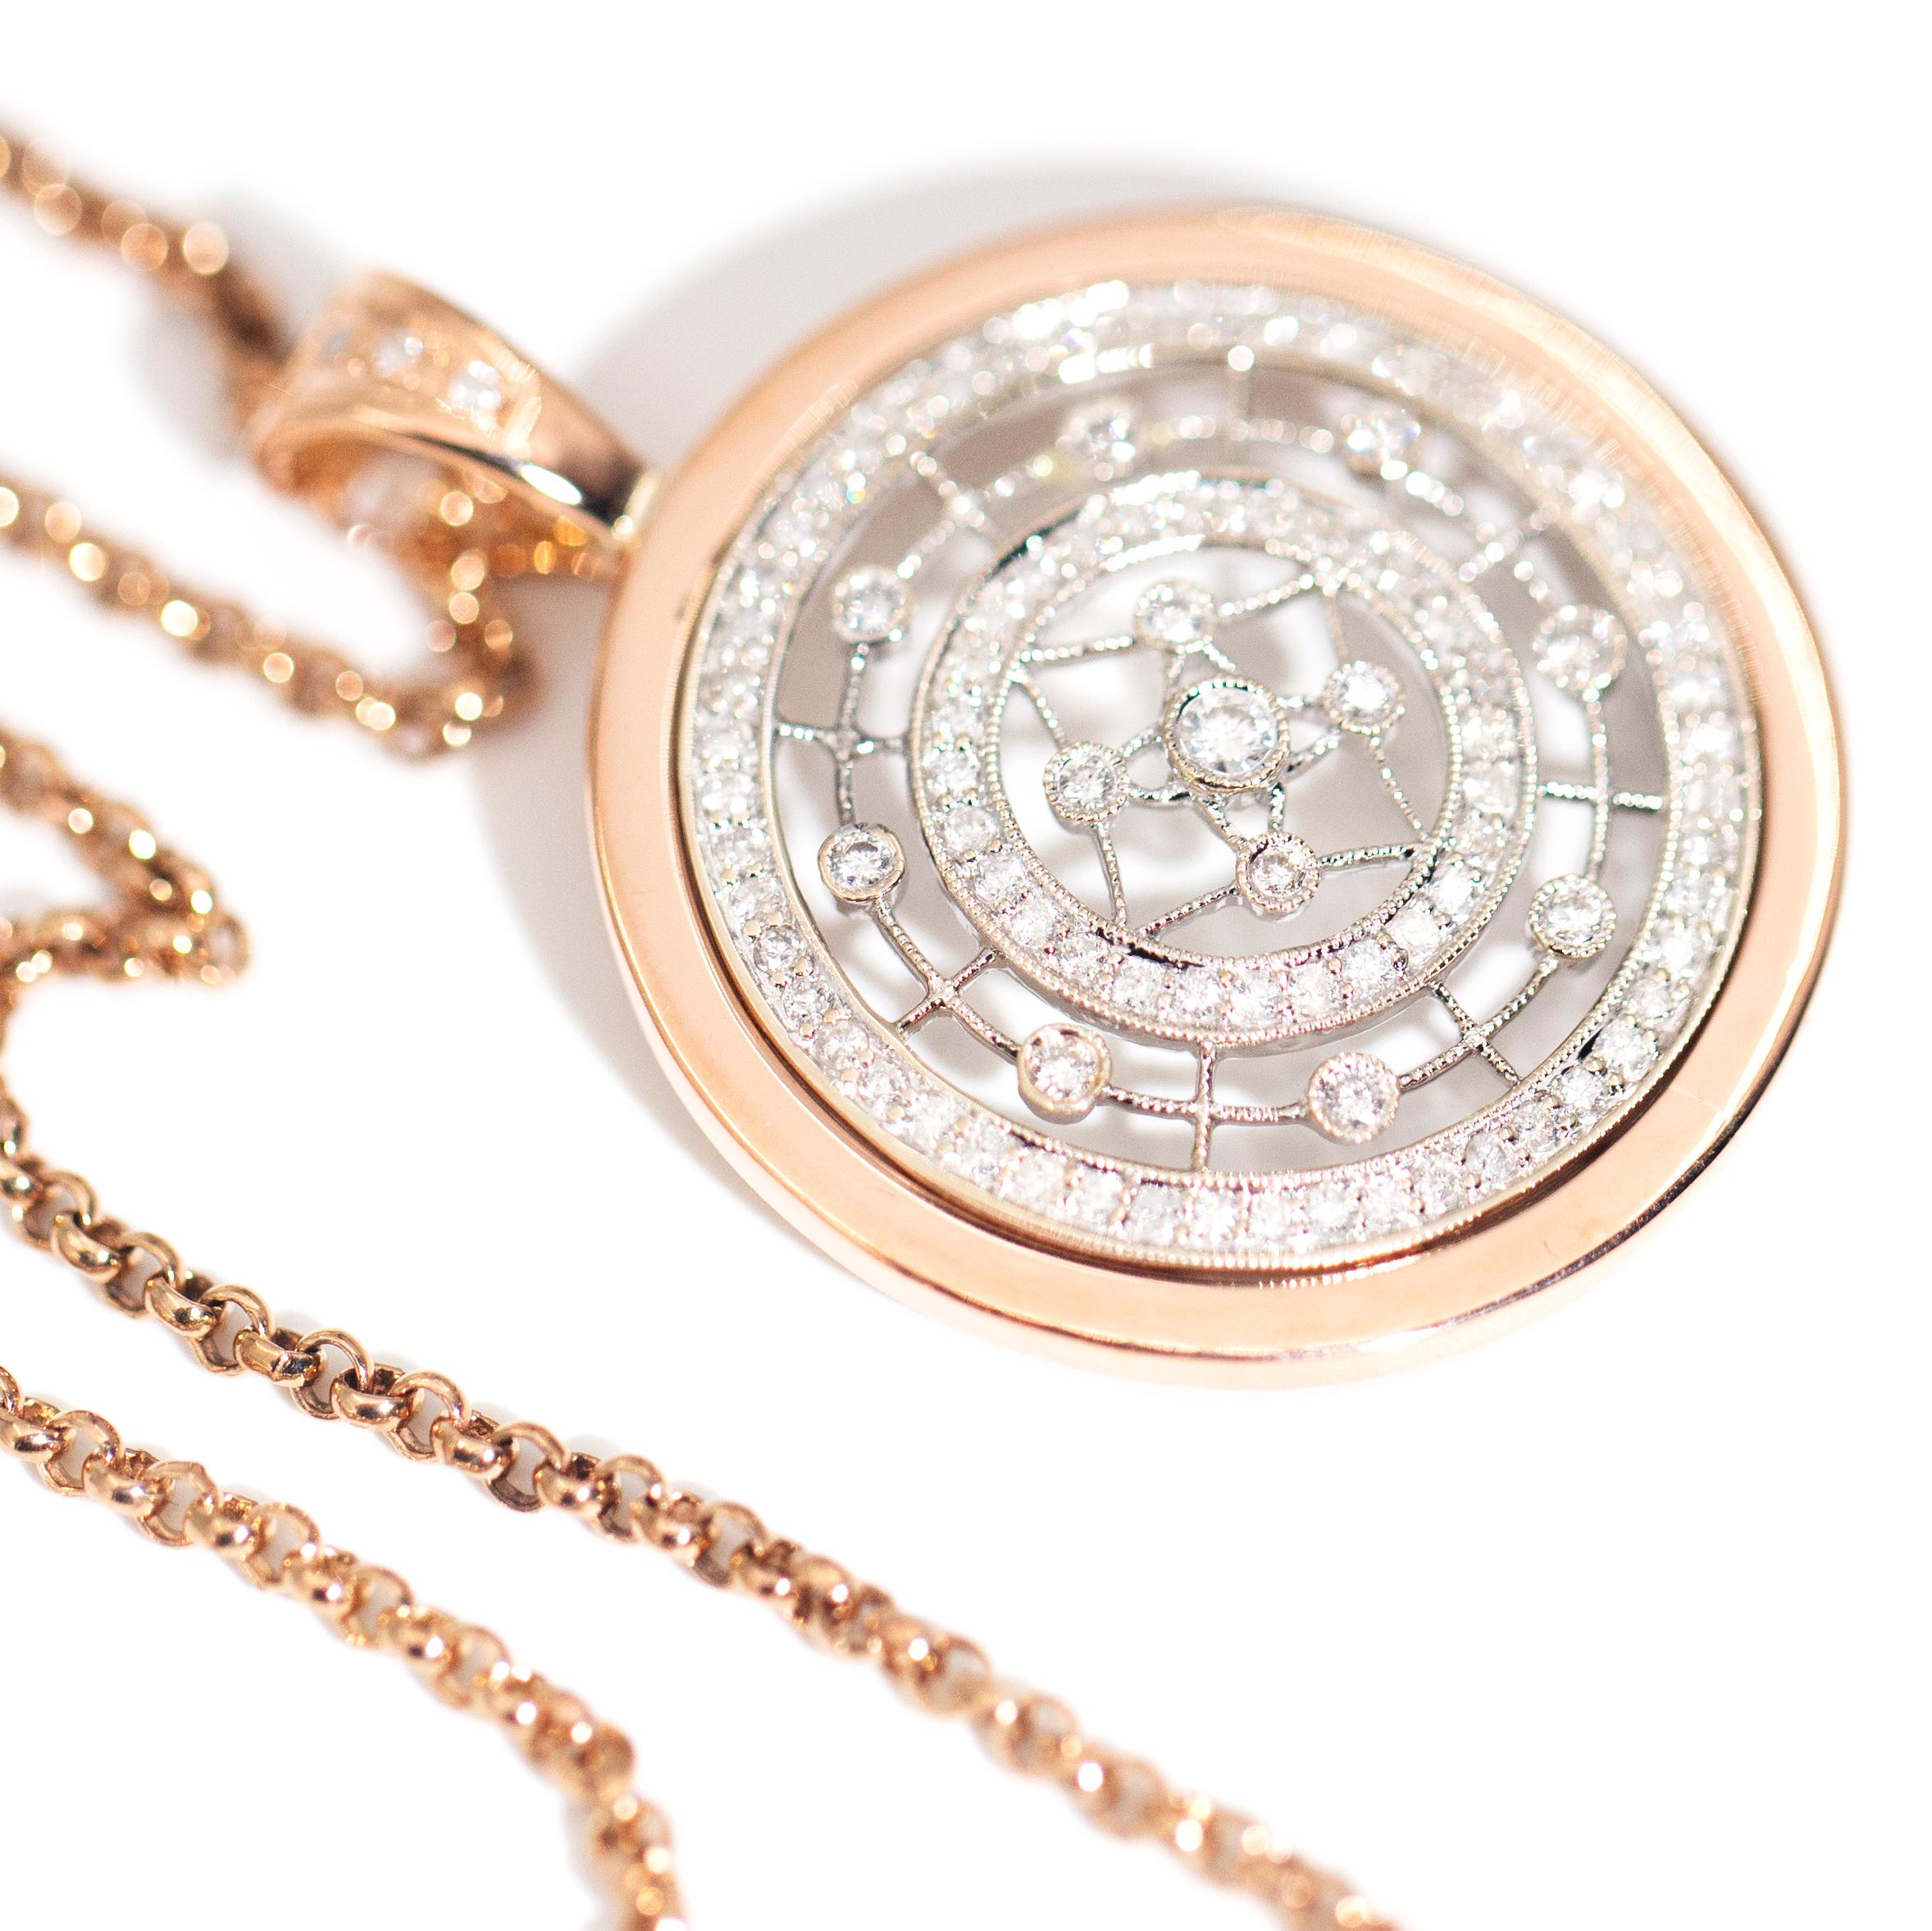 Circa 1980s 9 Carat Rose and White Gold Diamond Disc Enhancer Pendant and Chain 4